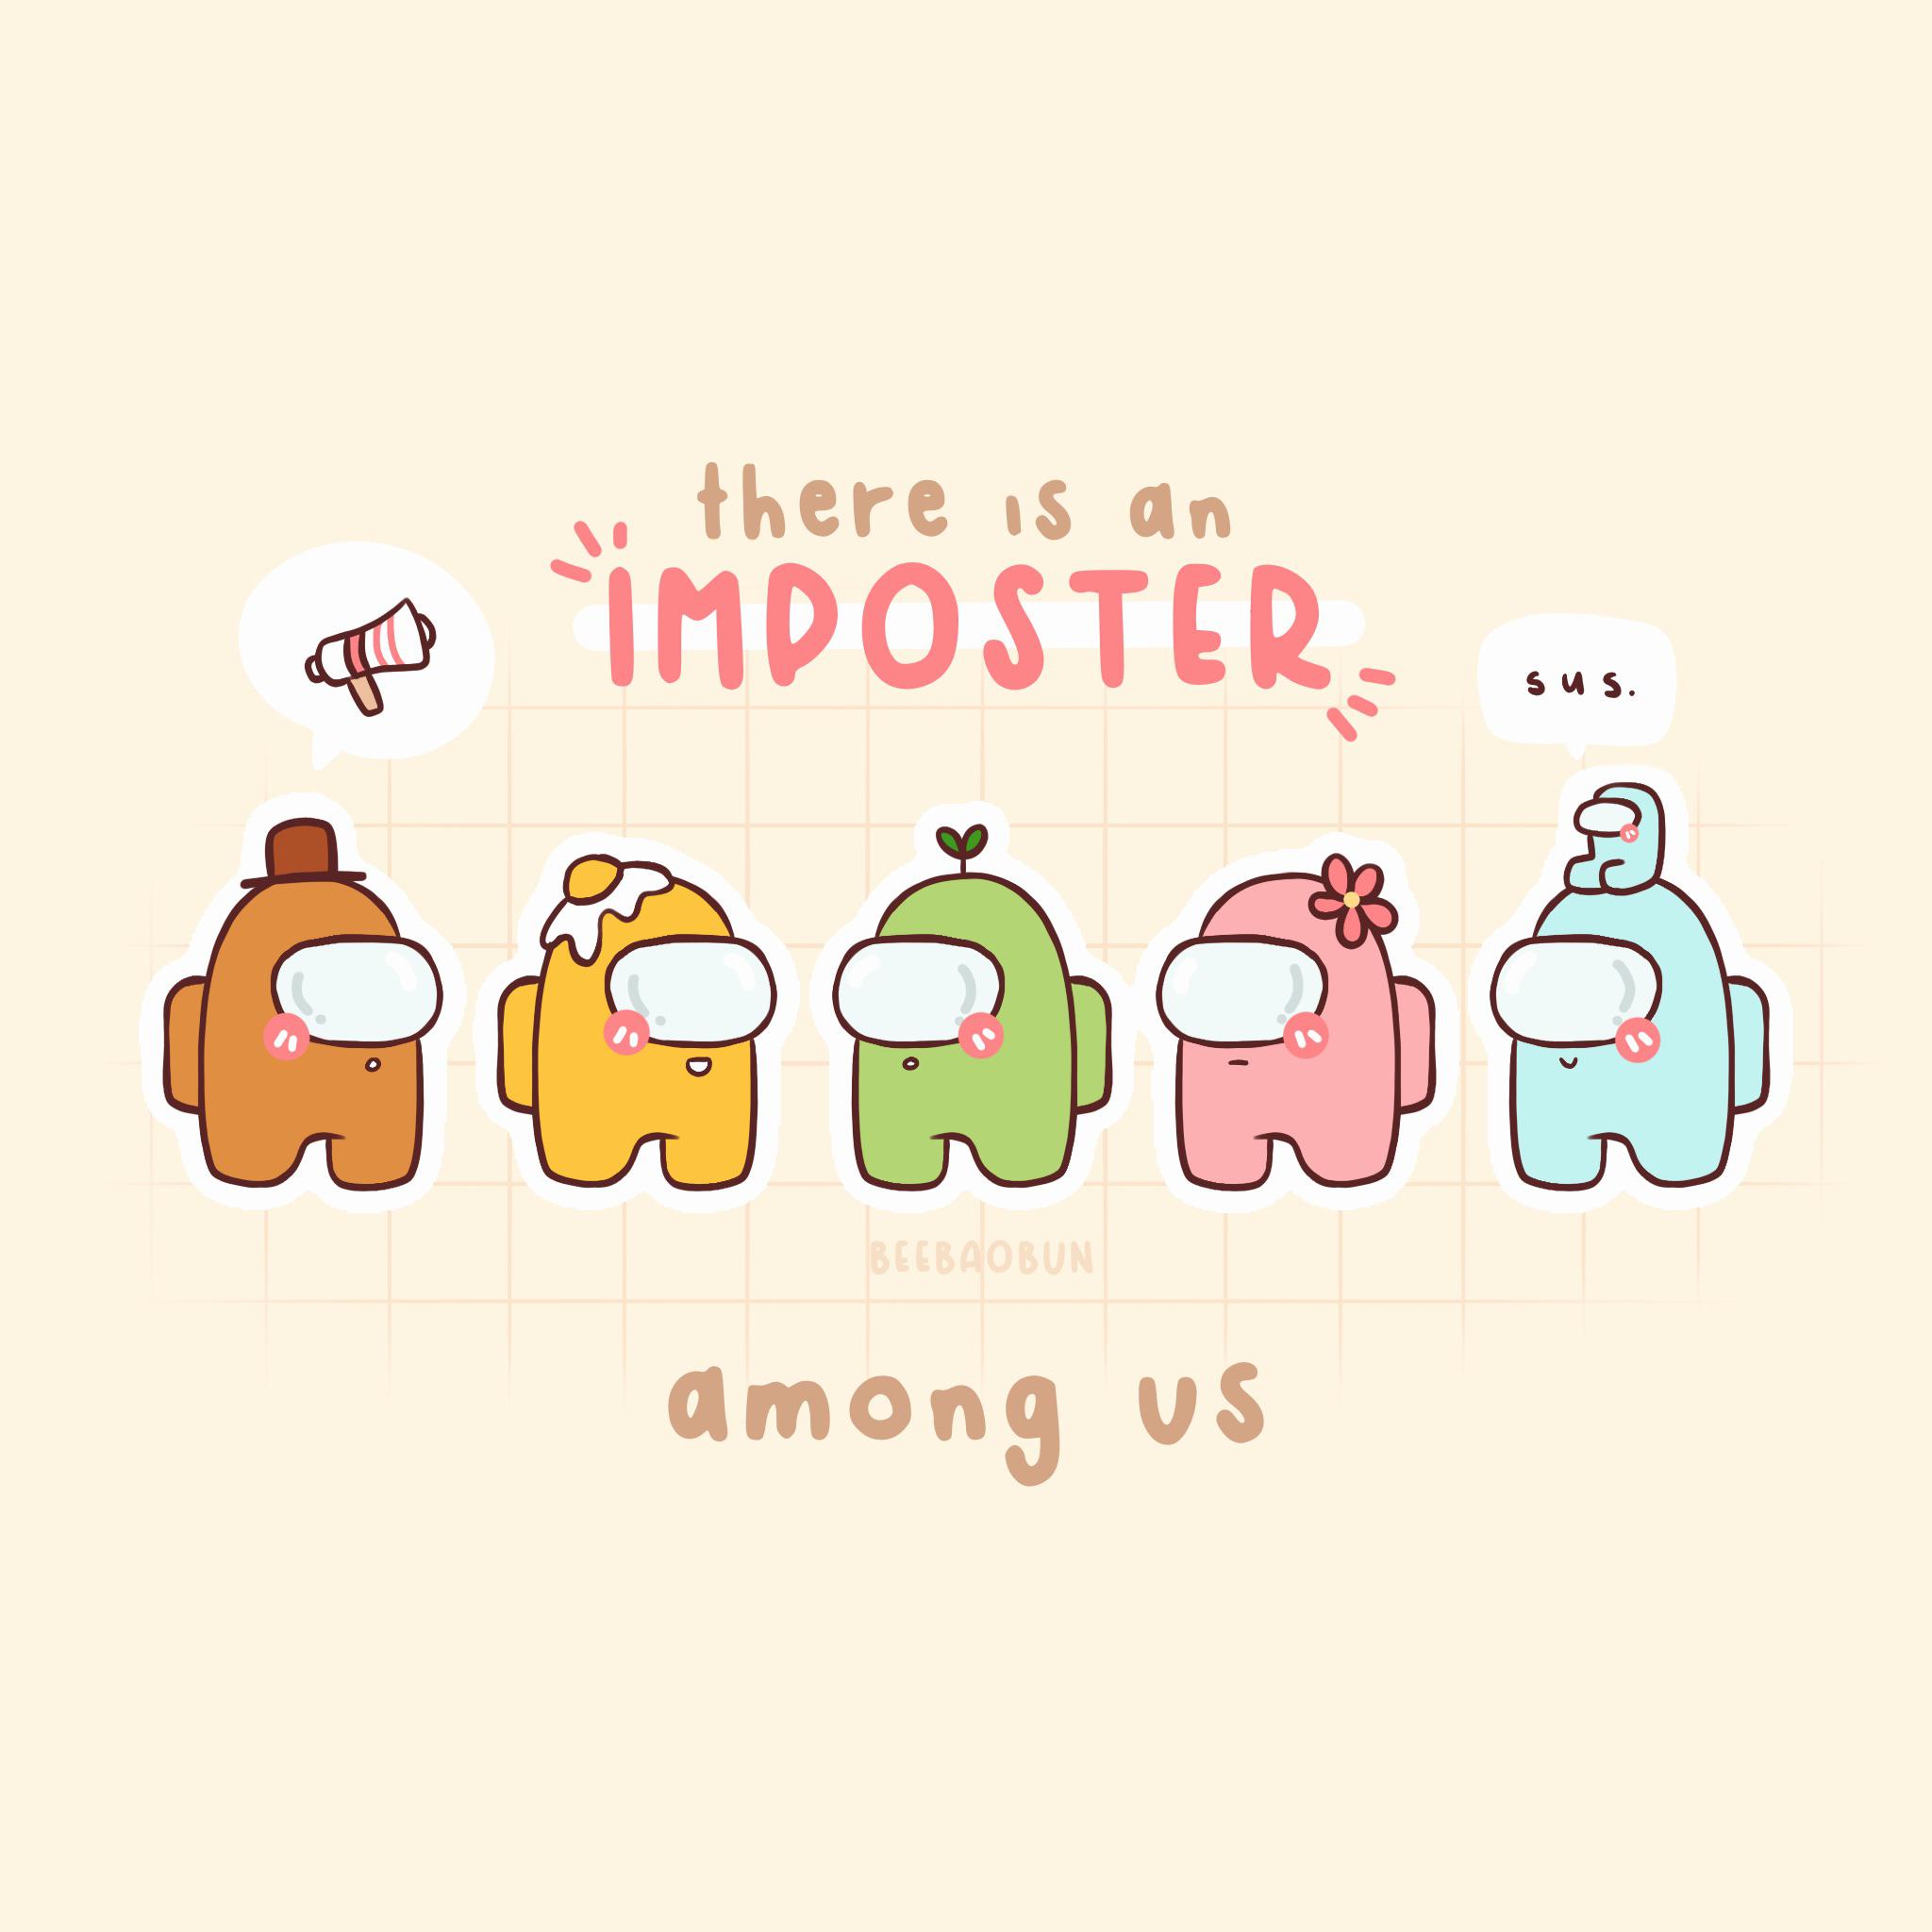 There is an imposter among us - Among Us